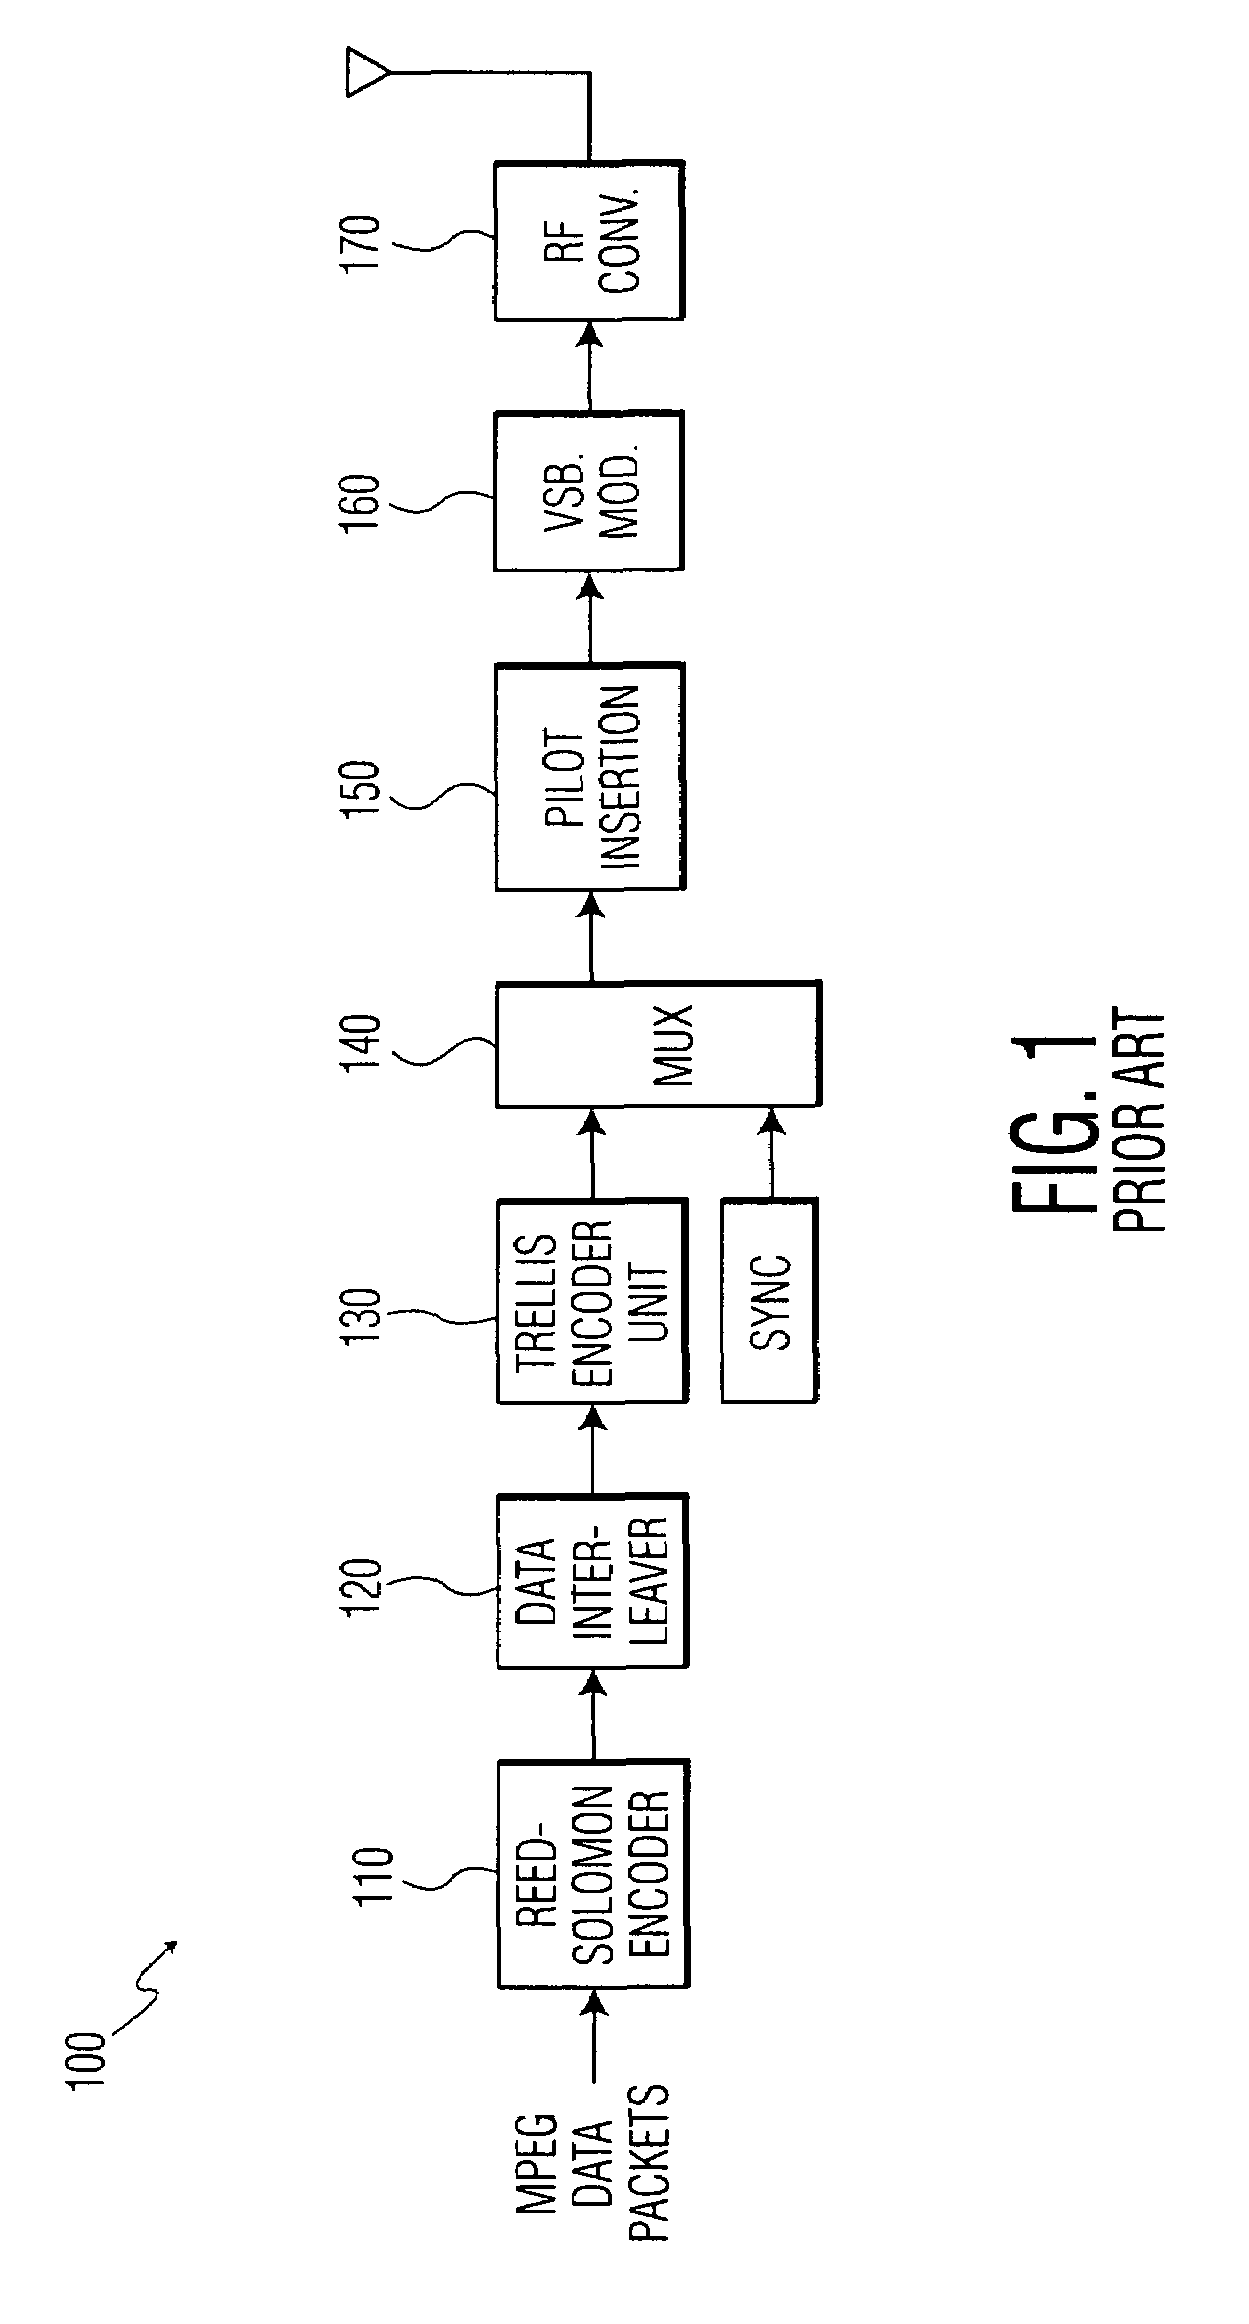 Two stage equalizer for trellis coded systems